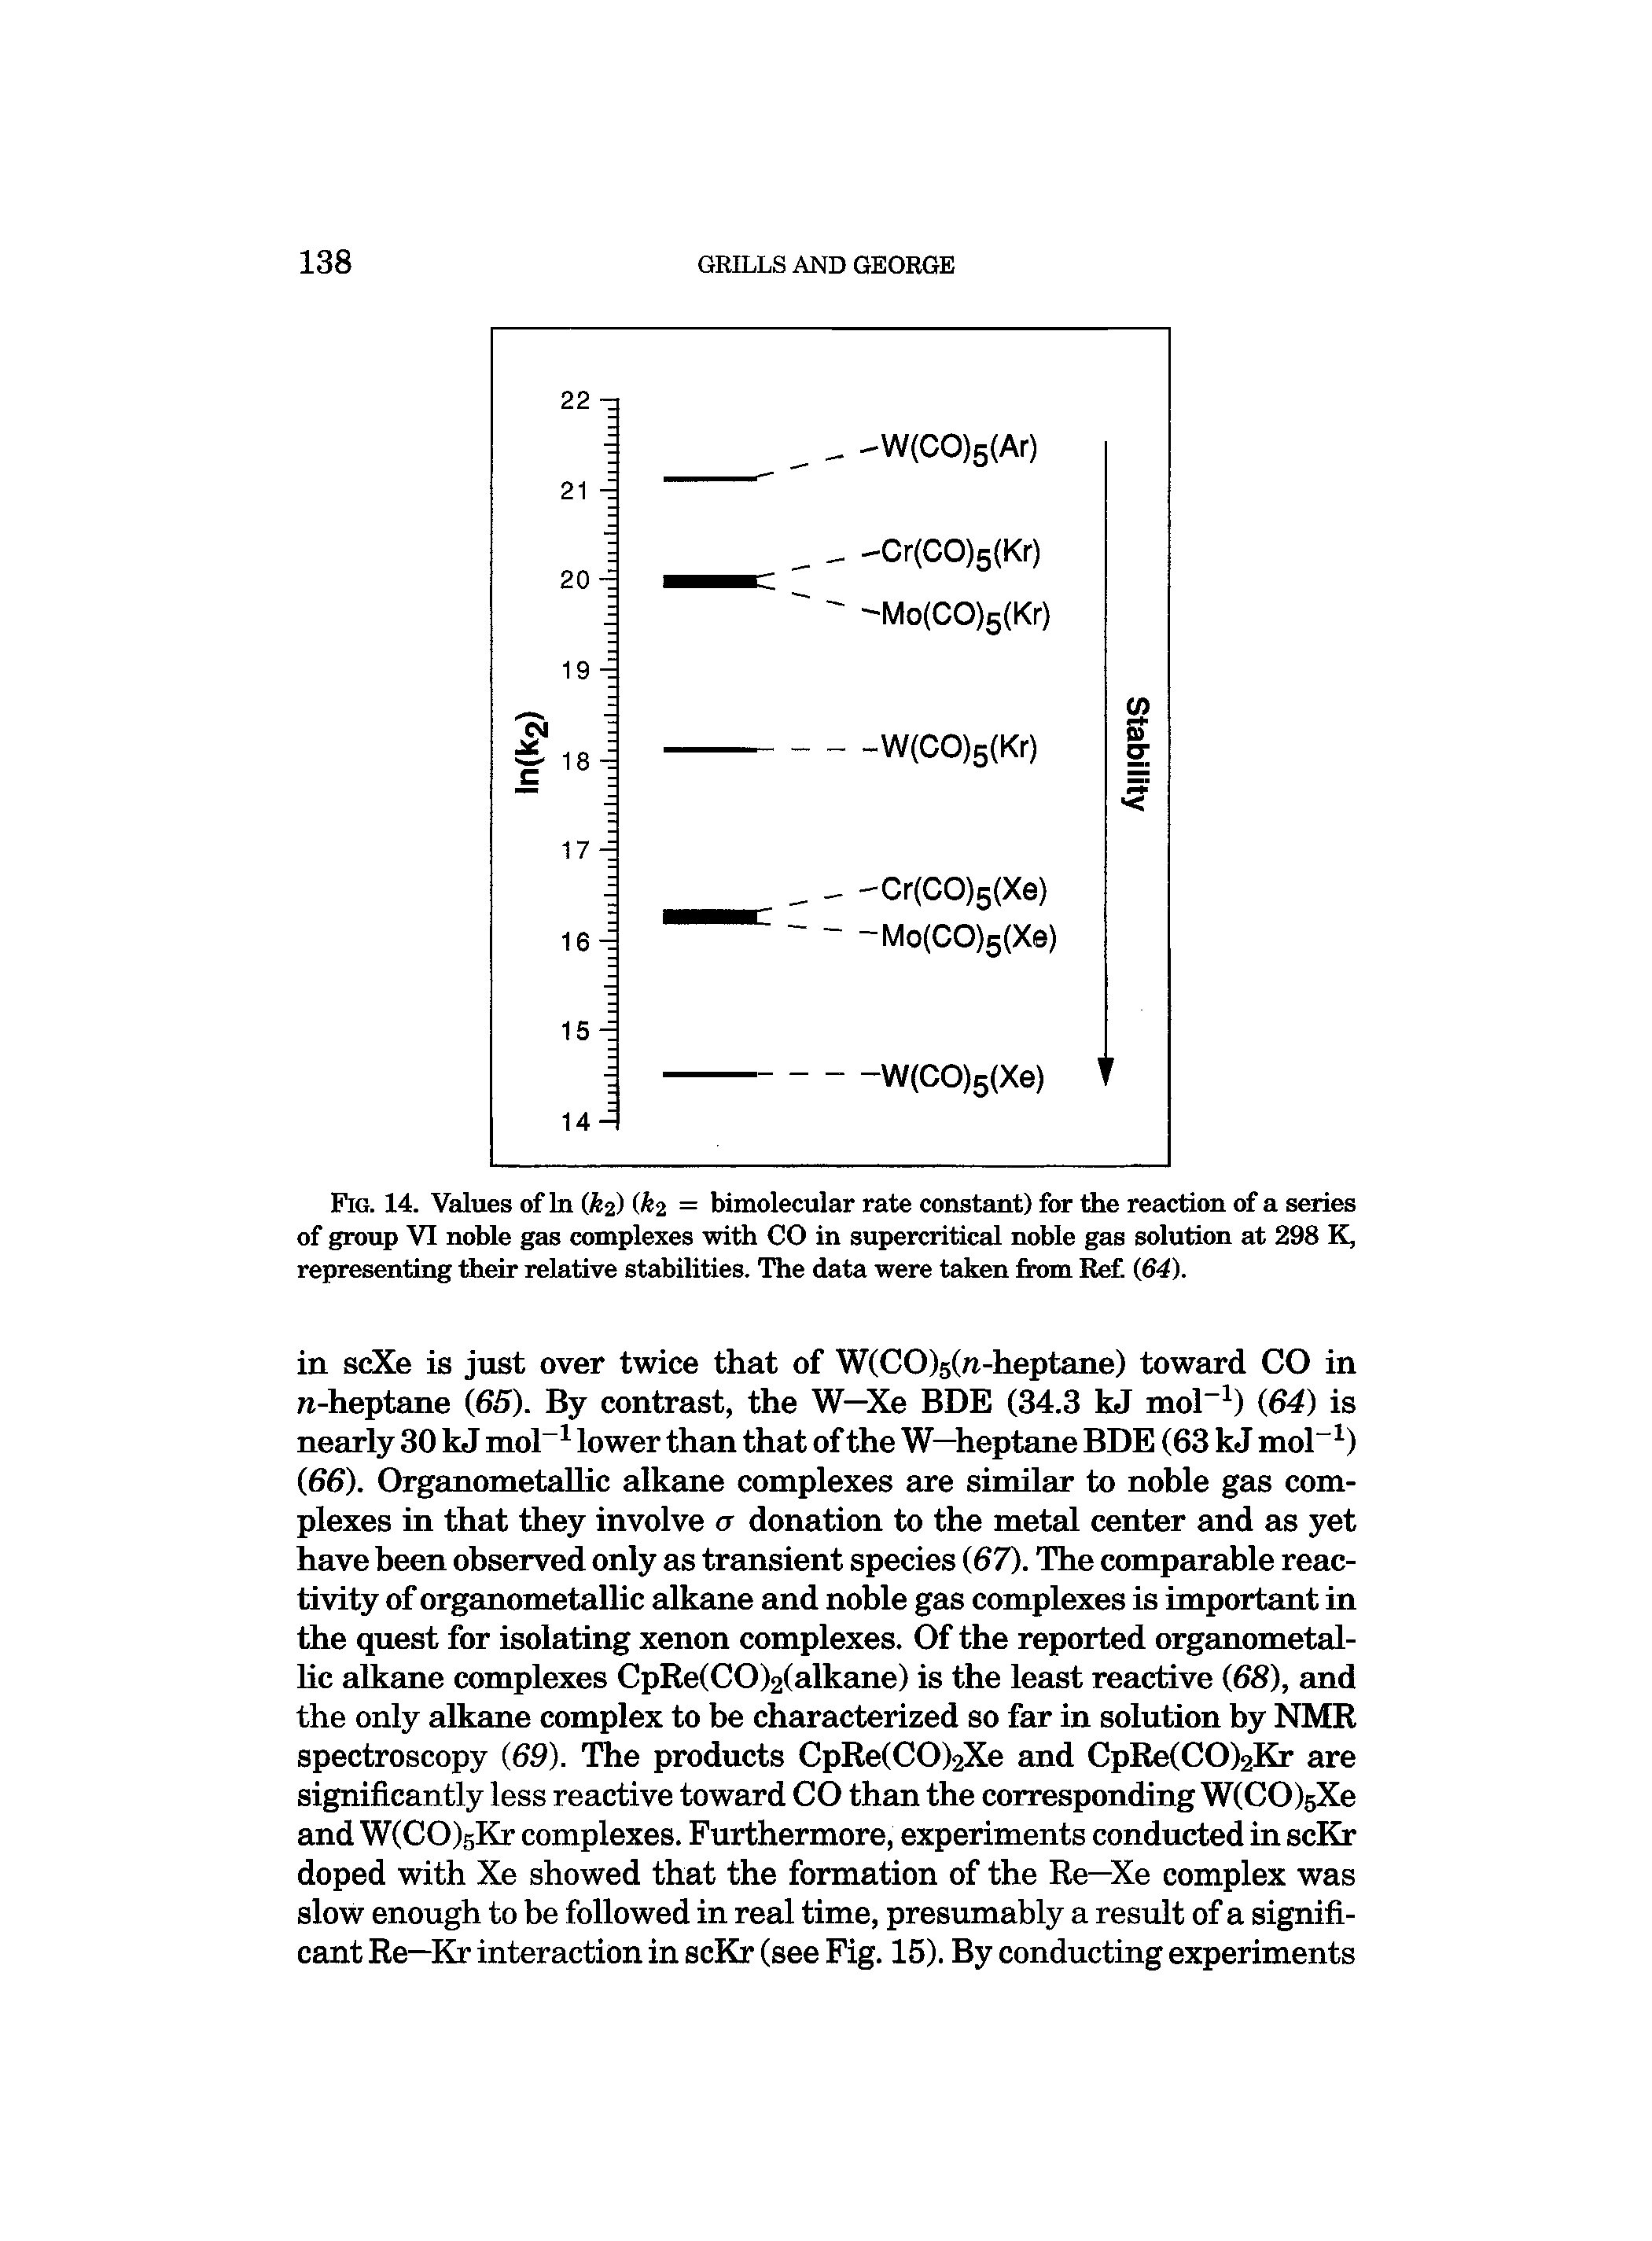 Fig. 14. Values of In (A2) ( 2 = bimolecular rate constant) for the reaction of a series of group VI noble gas complexes with CO in supercritical noble gas solution at 298 K, representing their relative stabilities. The data were taken from Ref. (64).